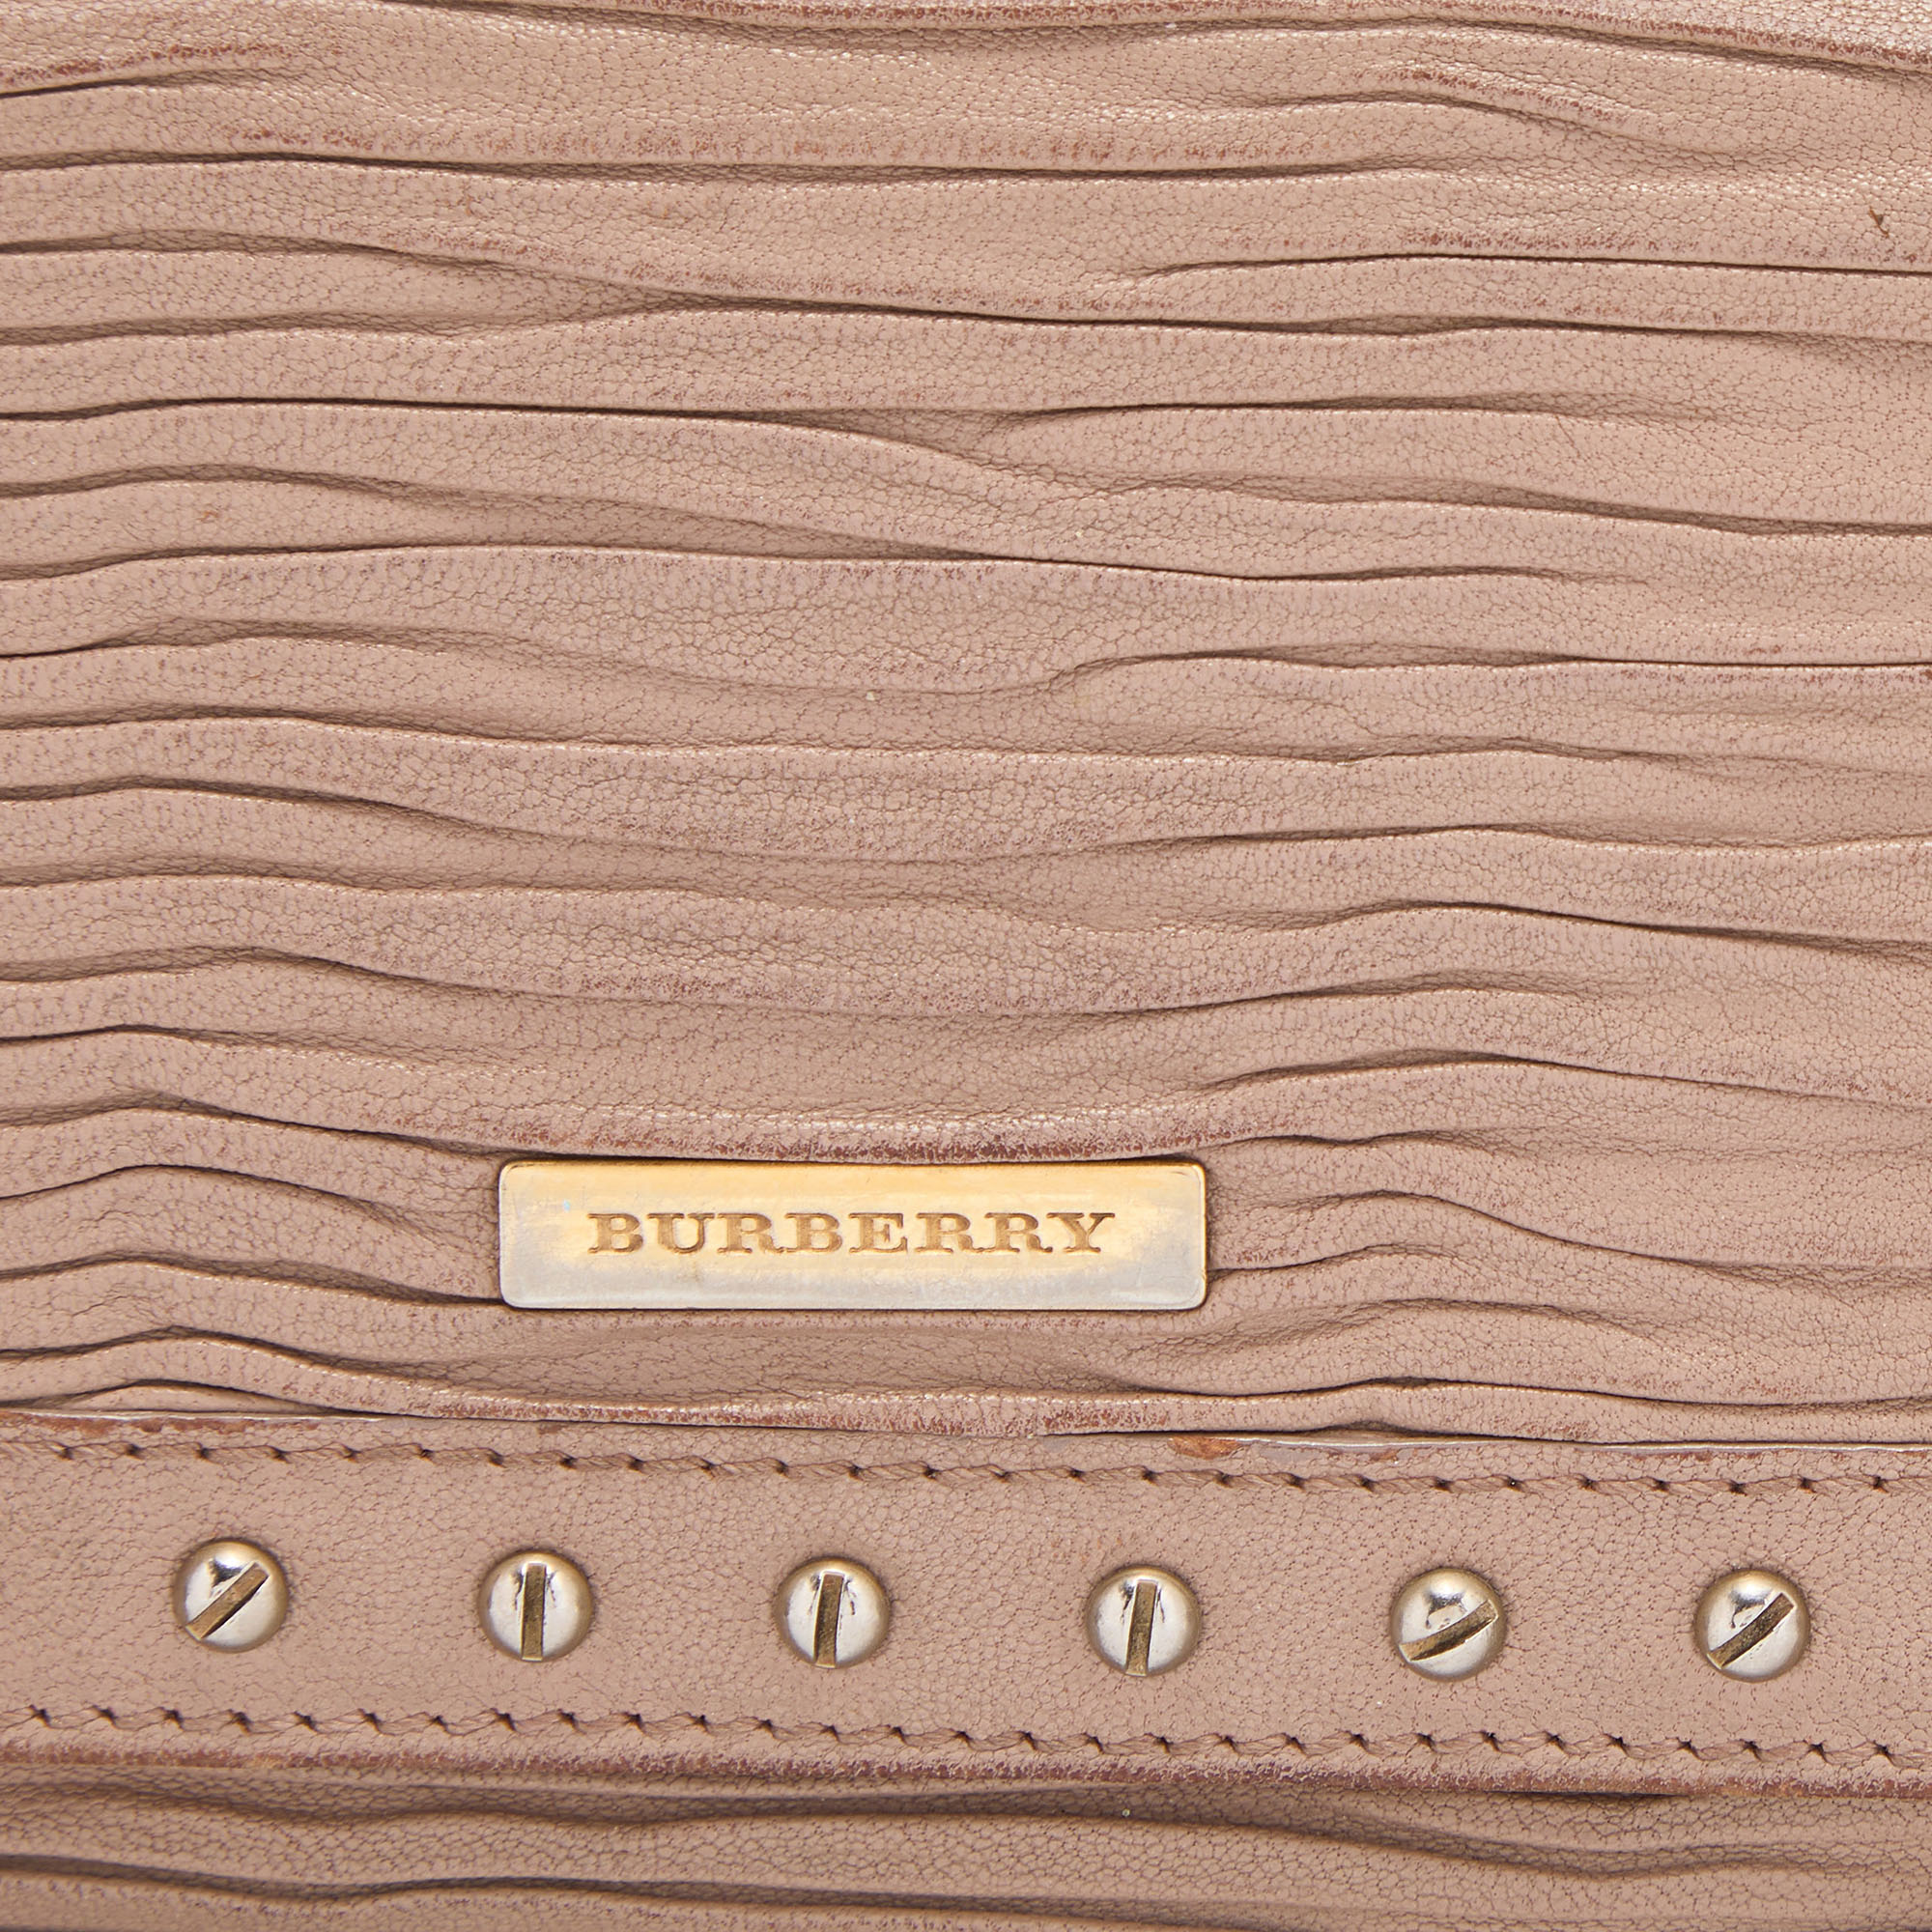 Burberry Old Rose Pleated Leather Flap Continental Wallet